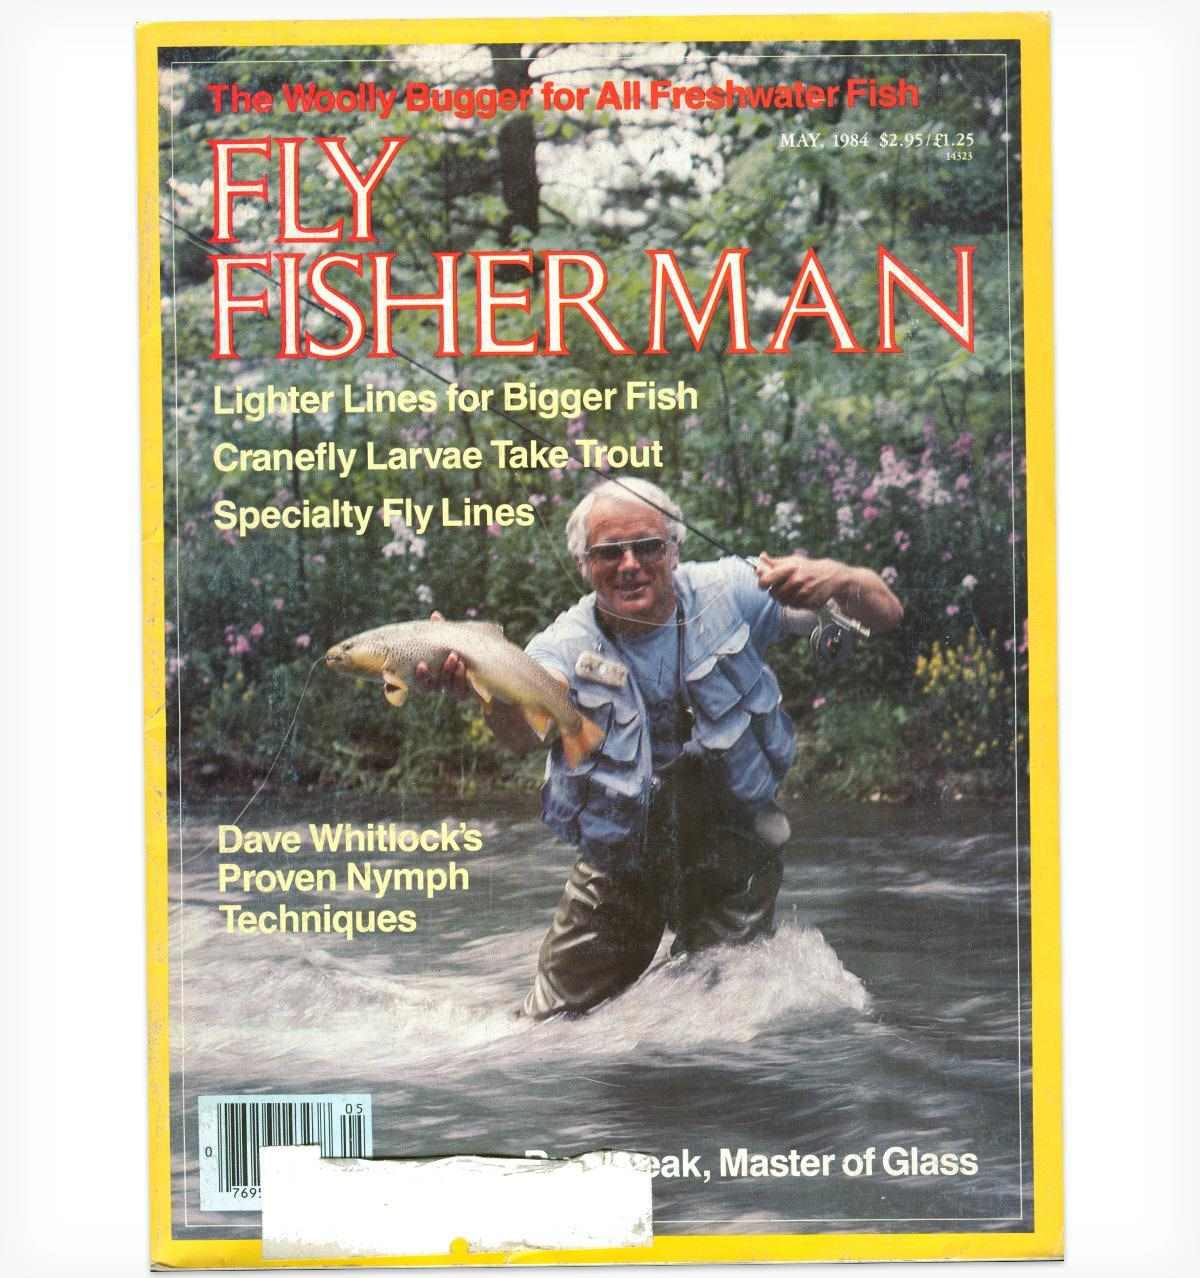 Magazines - Fly Fisherman - Durham County Library - OverDrive